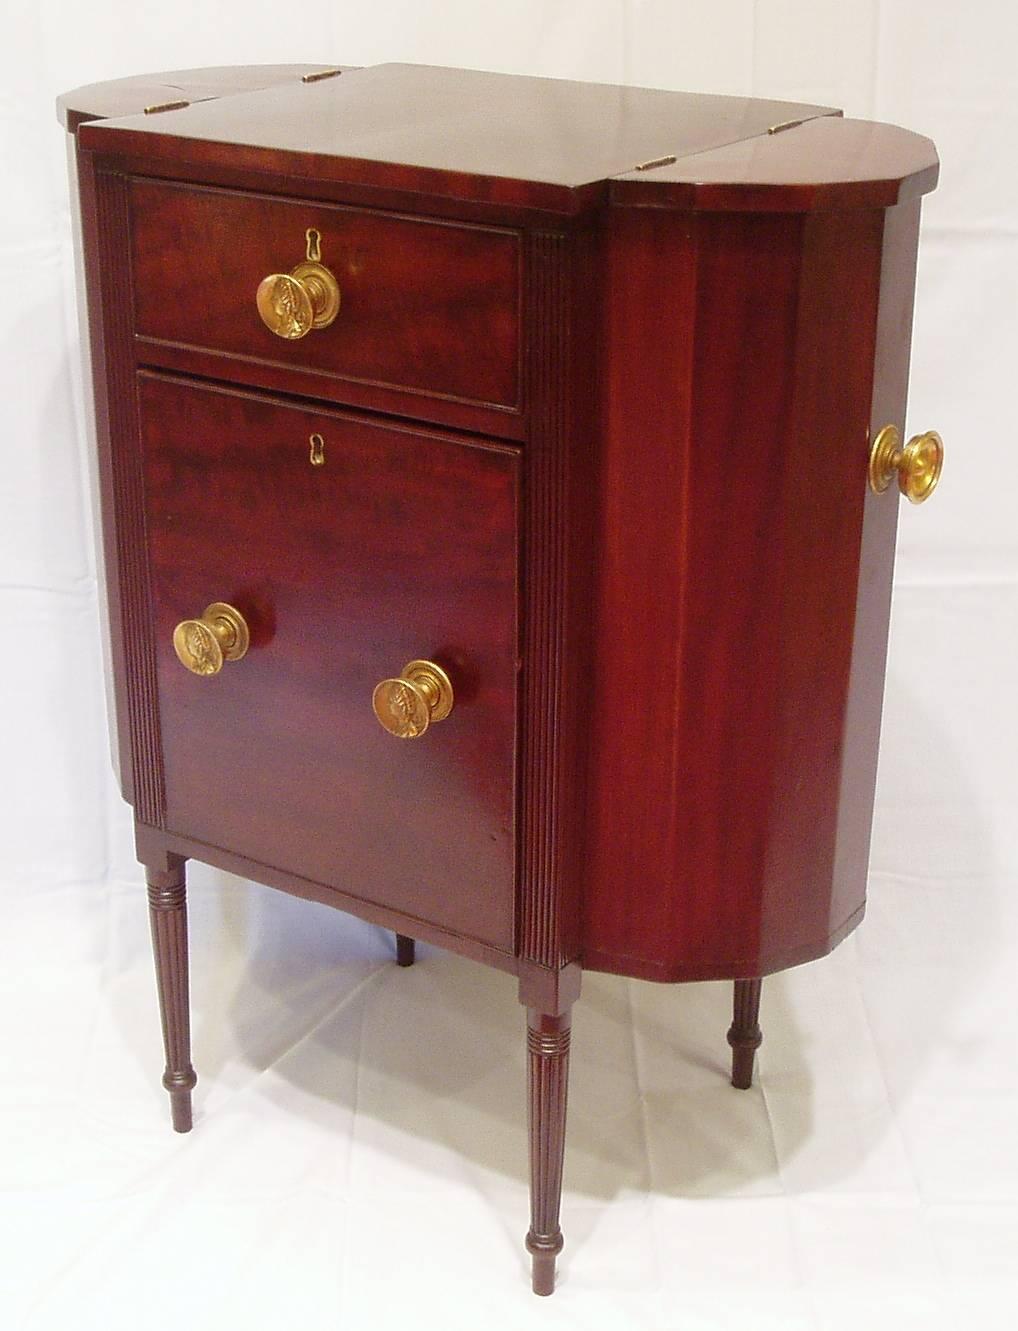 French polished mahogany and mahogany veneer with pine secondary wood old brasses with profile of Queen Charlotte, two center graduated drawers and two lift top ends, top drawer has divided interior, finely reeded legs.